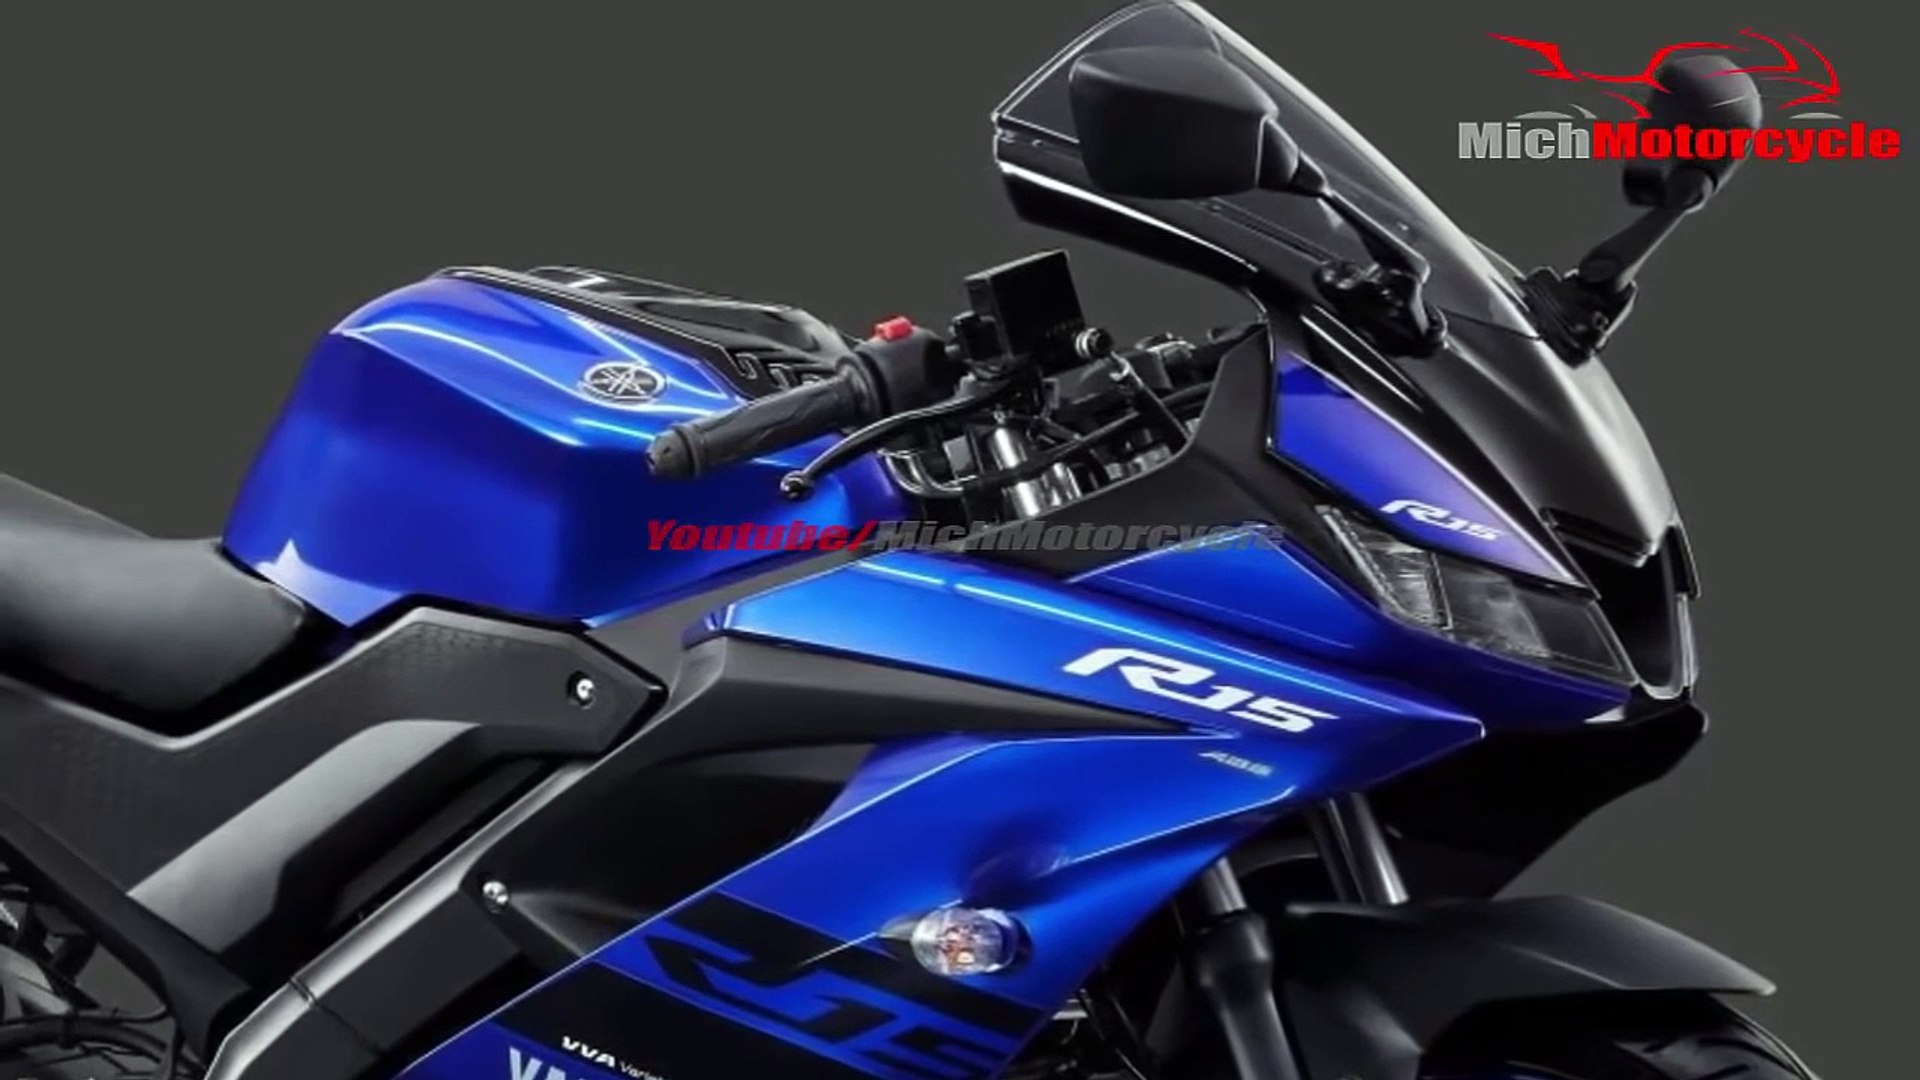 New Yamaha R15 V3 - R15 V3 Dual Channel Abs , HD Wallpaper & Backgrounds